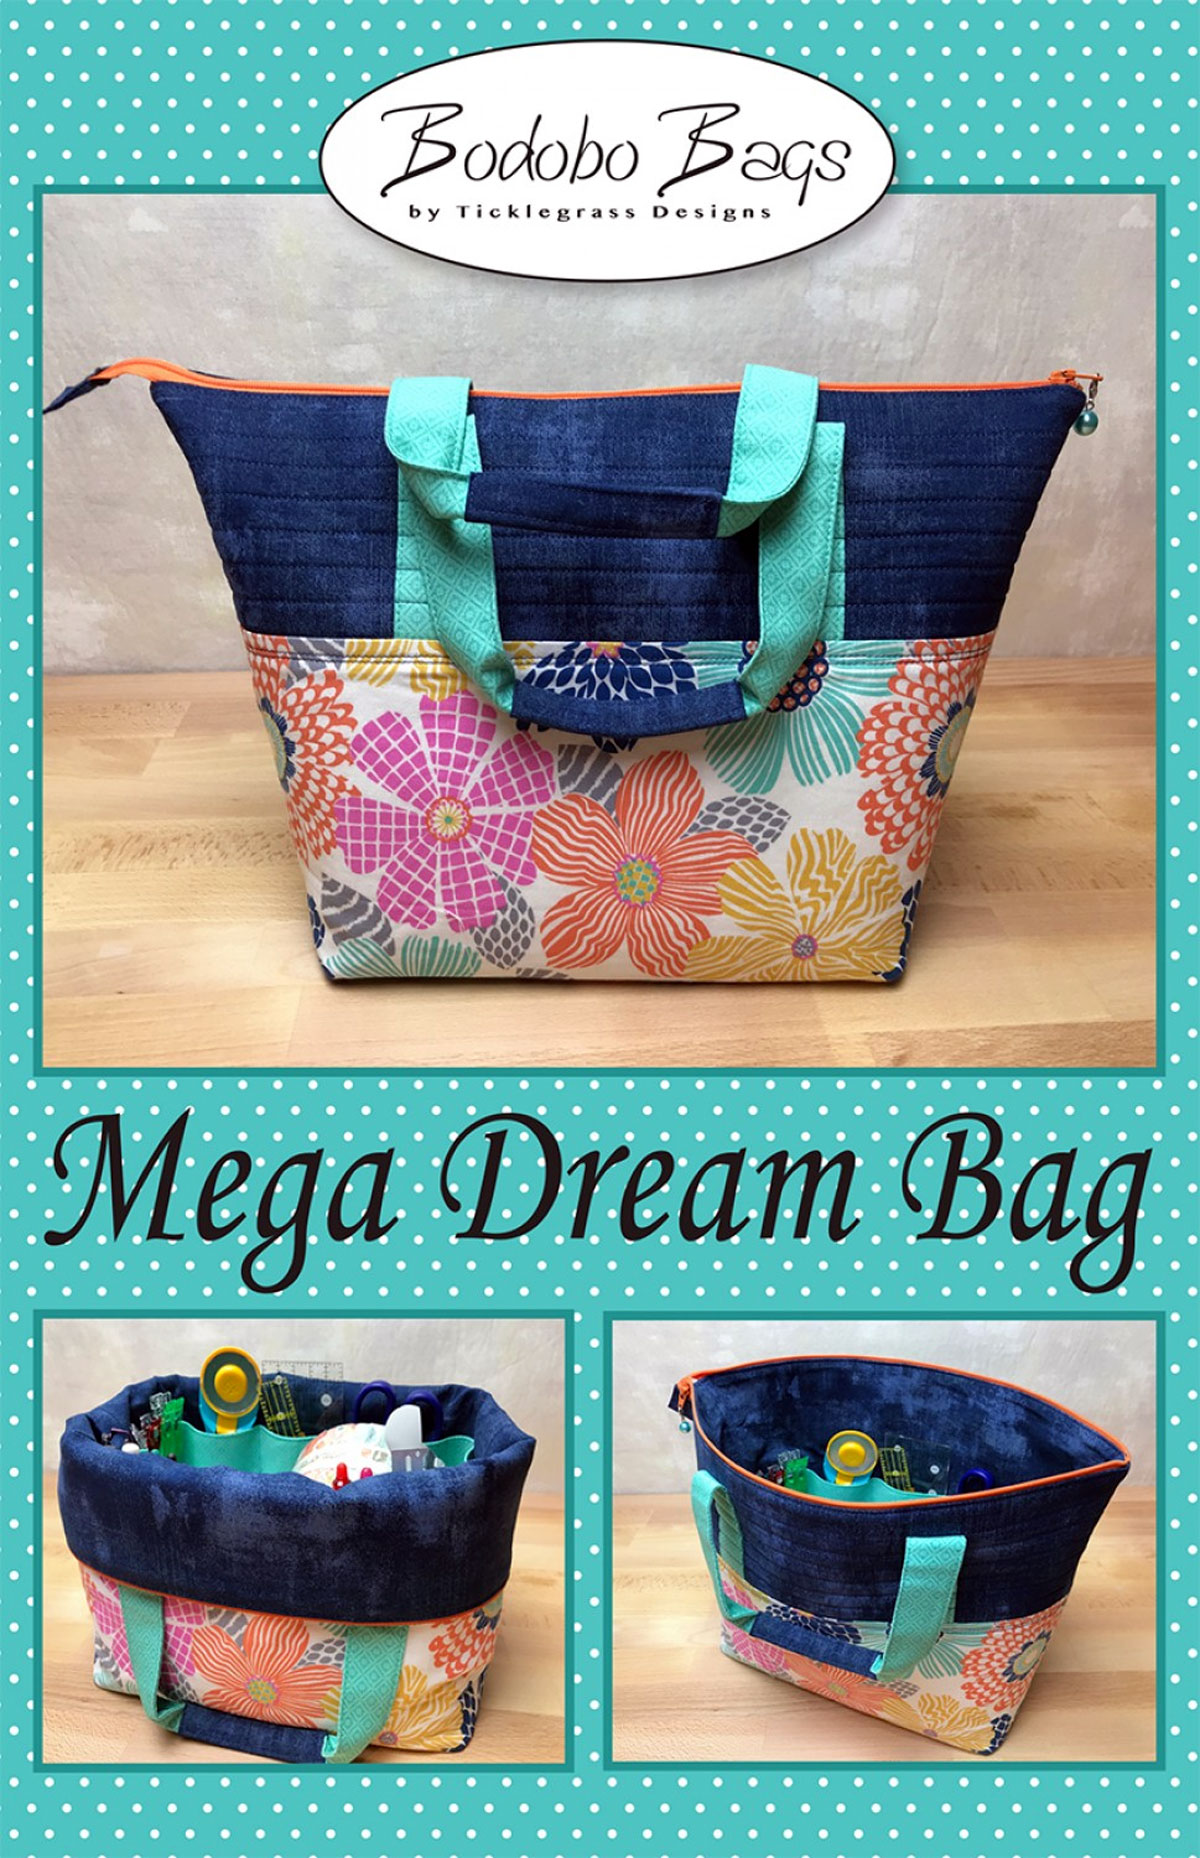 Simple Shoulder Bag sewing pattern from Bodobo Bags Ticklegrass